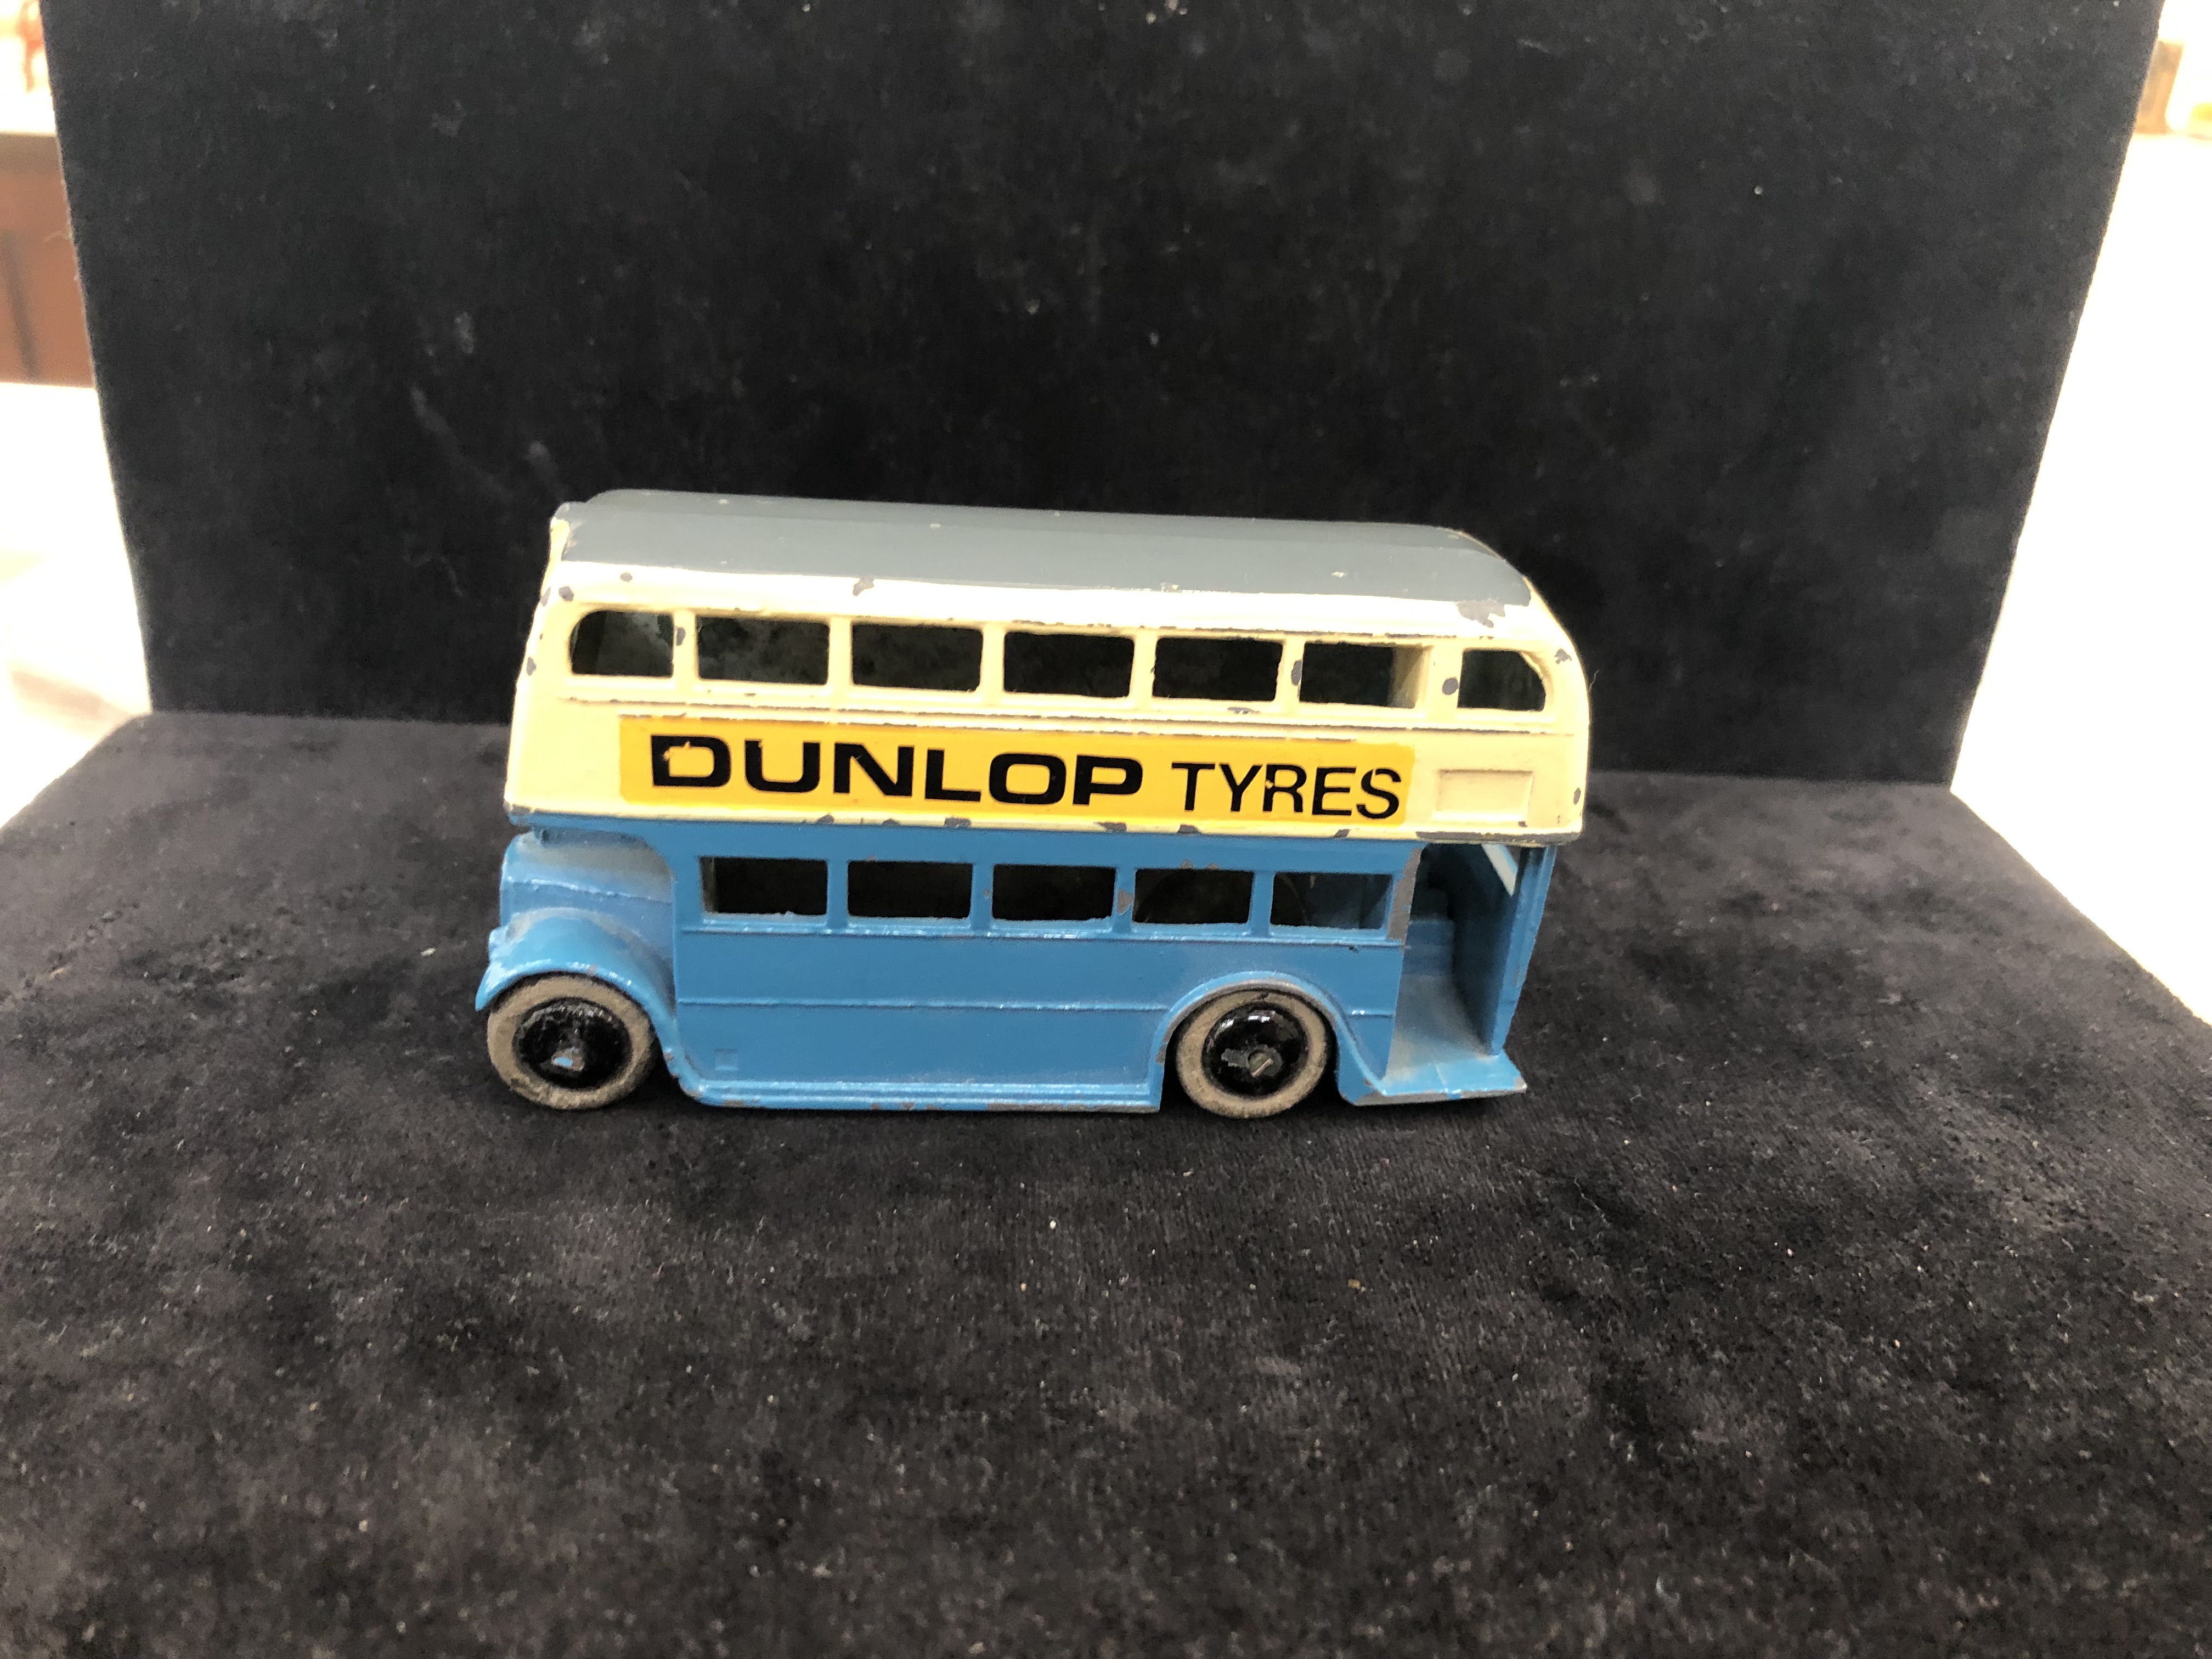 A pre-war Dinky bus with staircase and 'Dunlop tyres' in blue